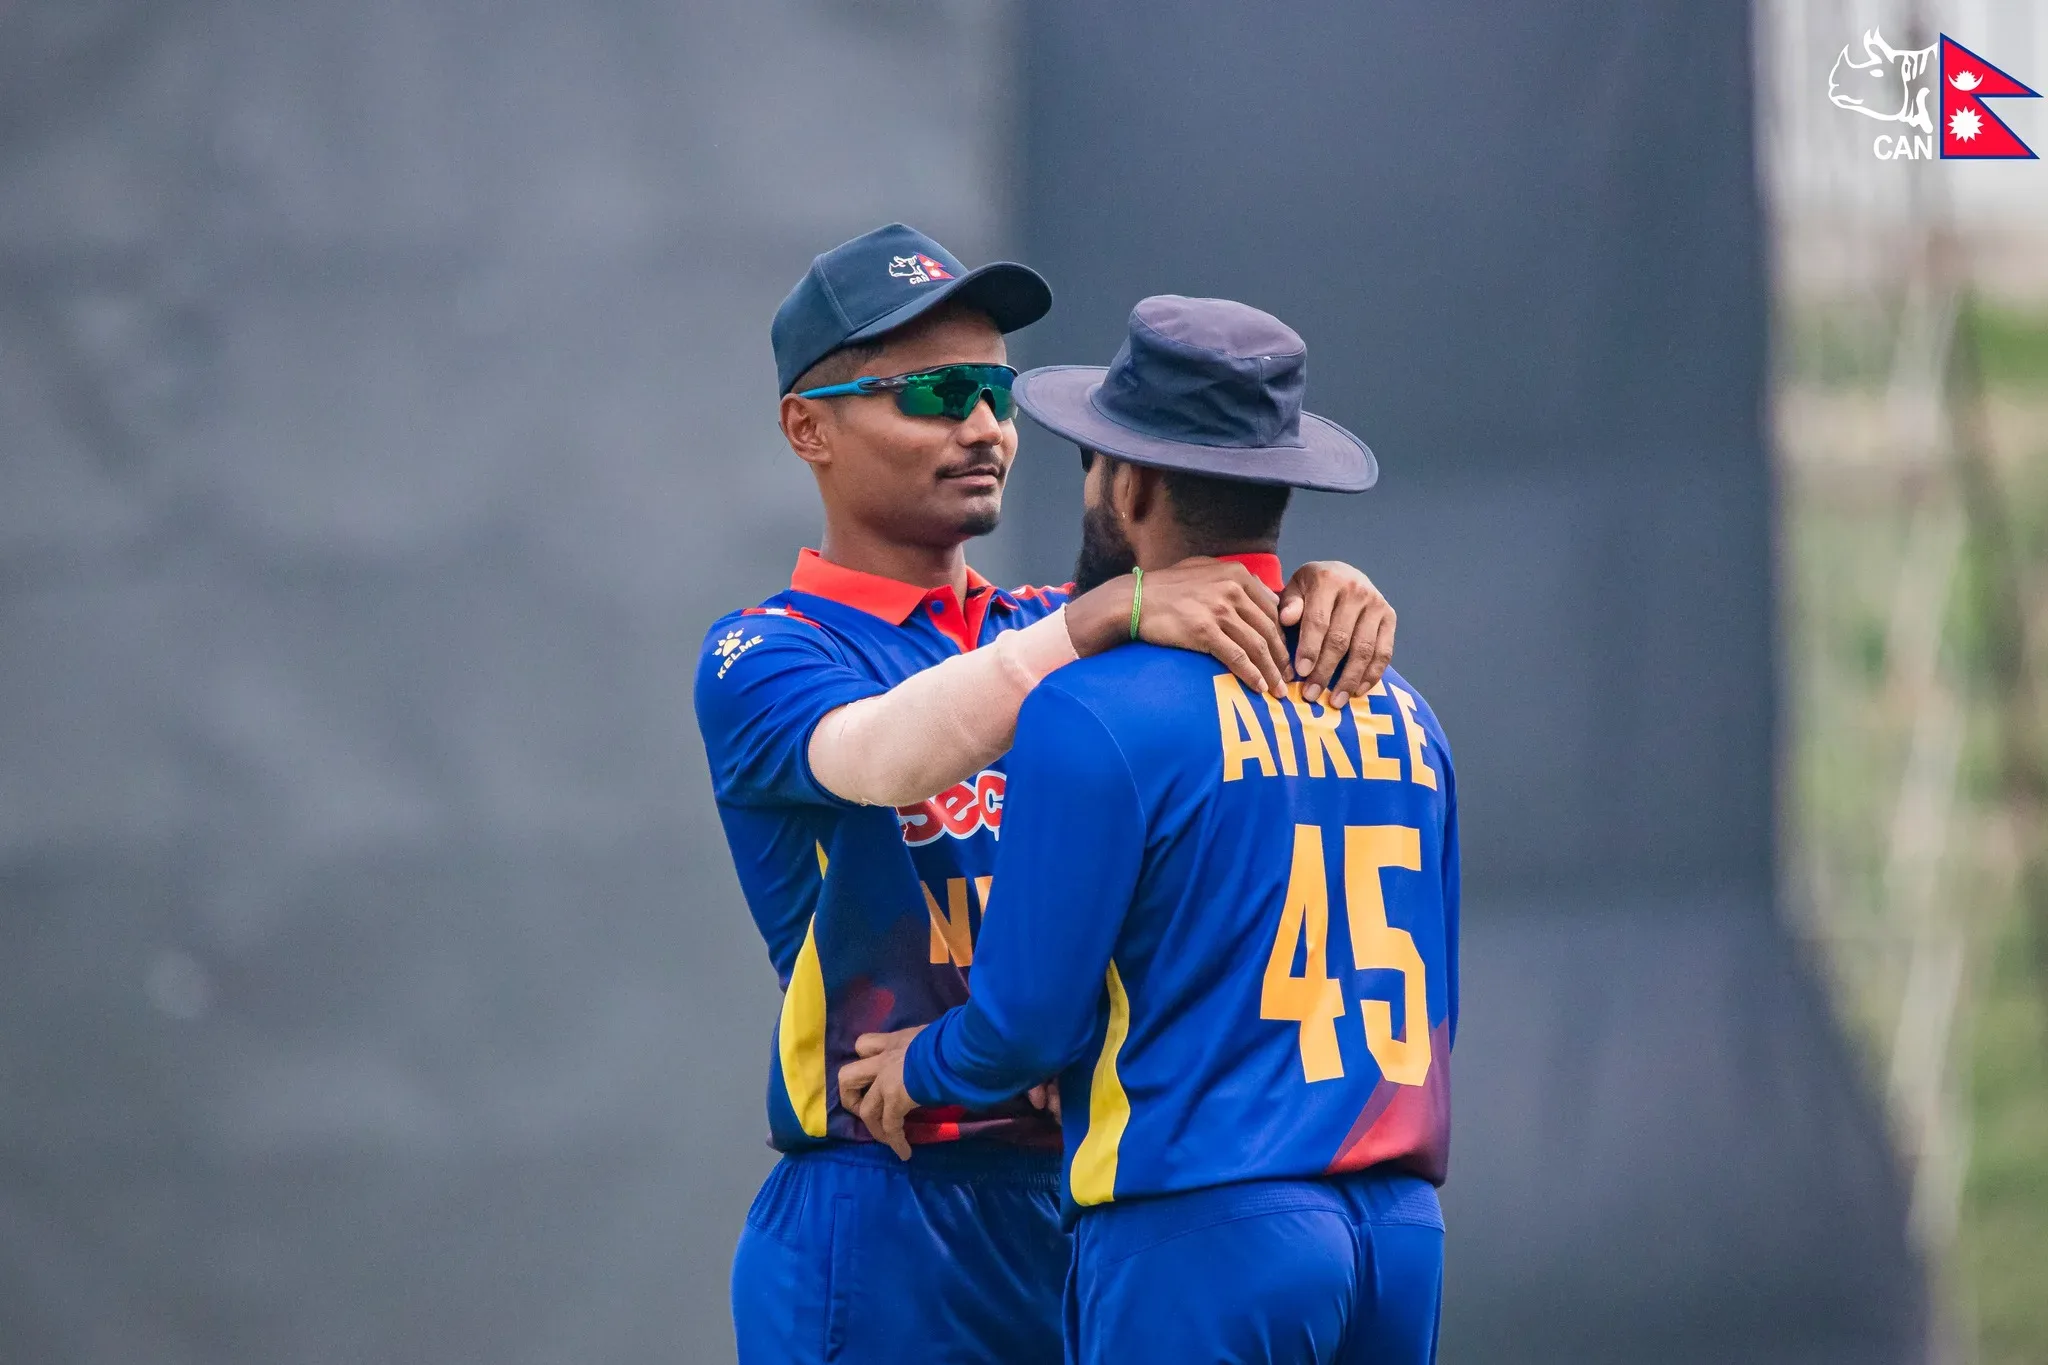 Dipendra Singh Airee and Rohit Paudel face visa issues ahead of departure for GT20 League Canada